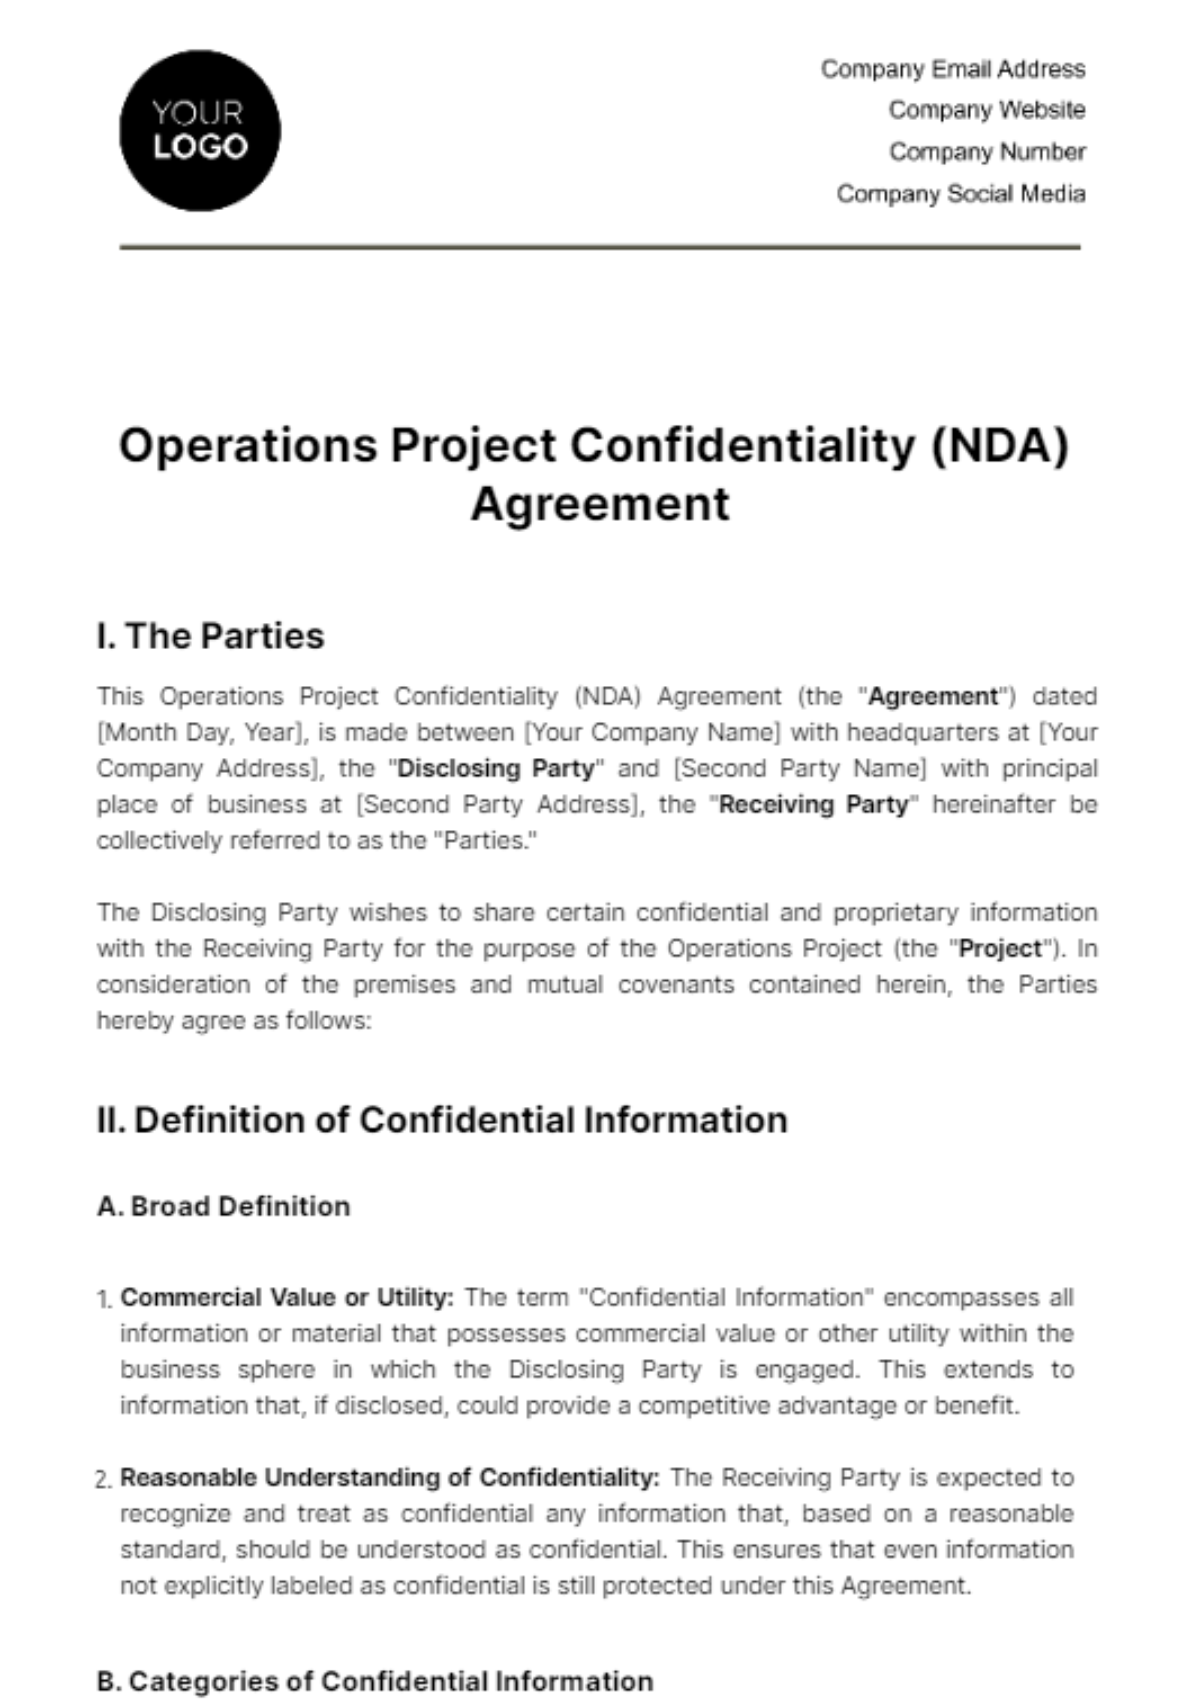 Free Operations Project Confidentiality (NDA) Agreement Template